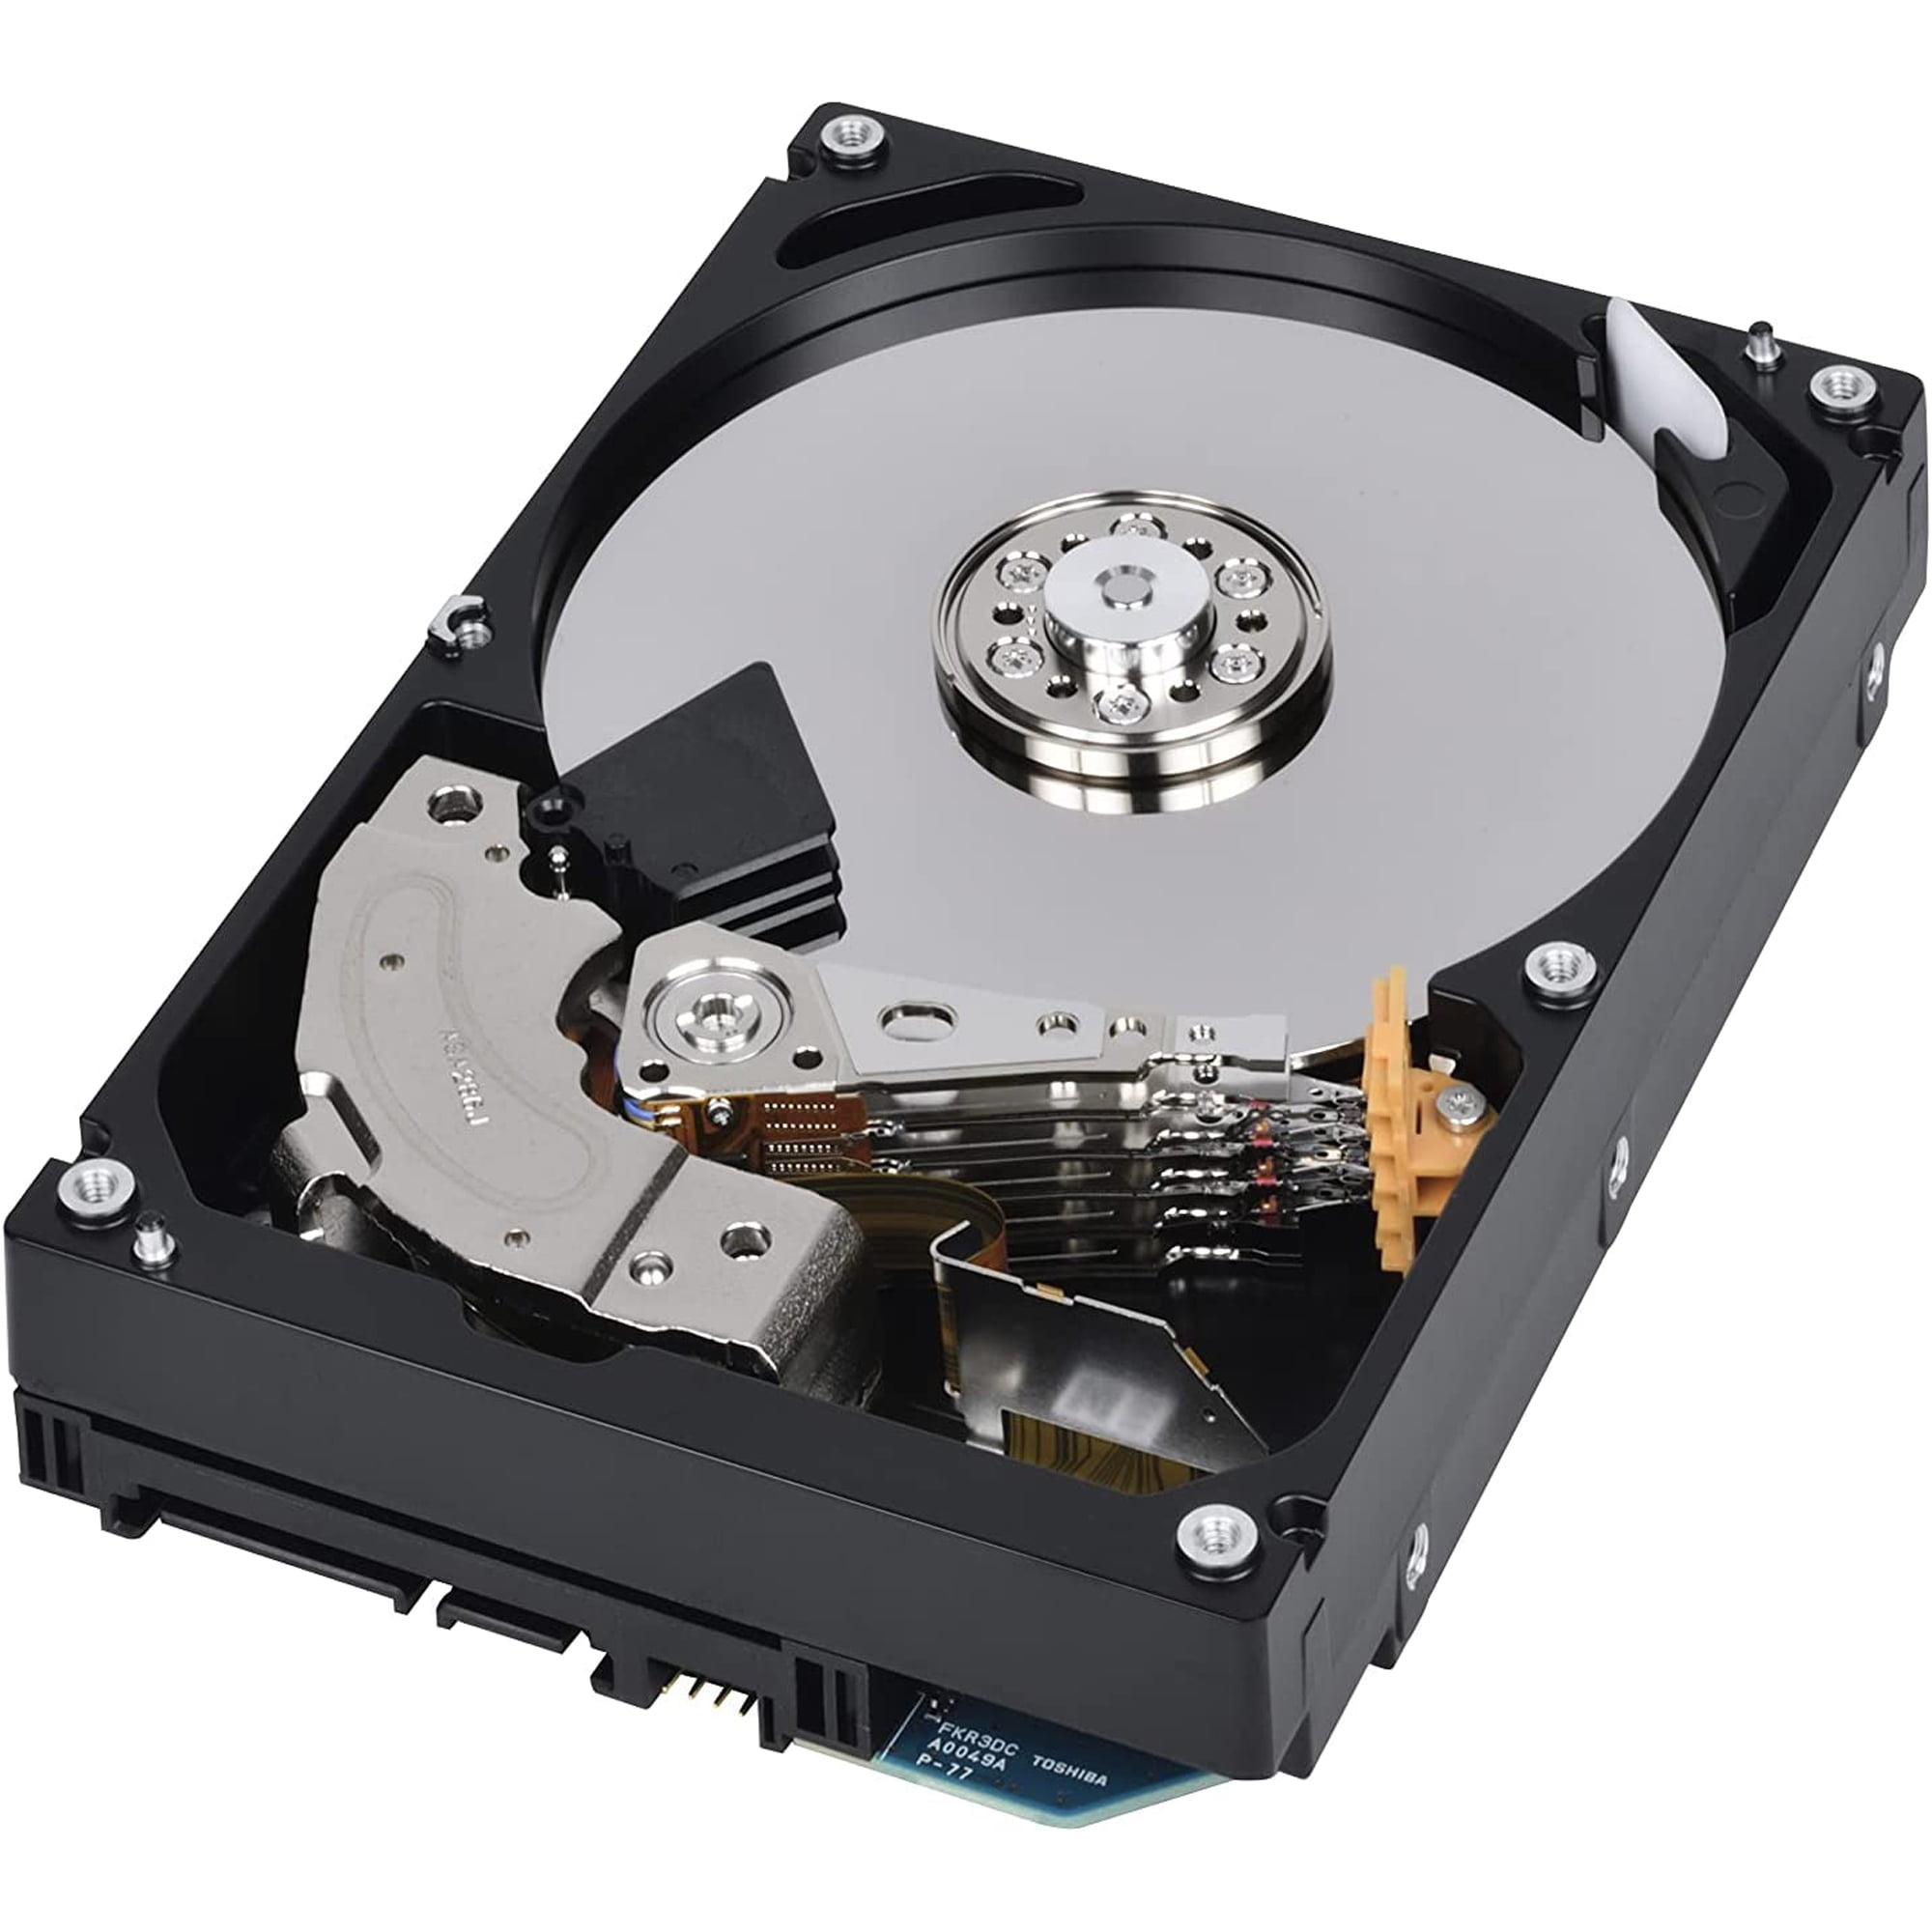  Toshiba Unveils N300 Pro And X300 Pro Hard Drives - News